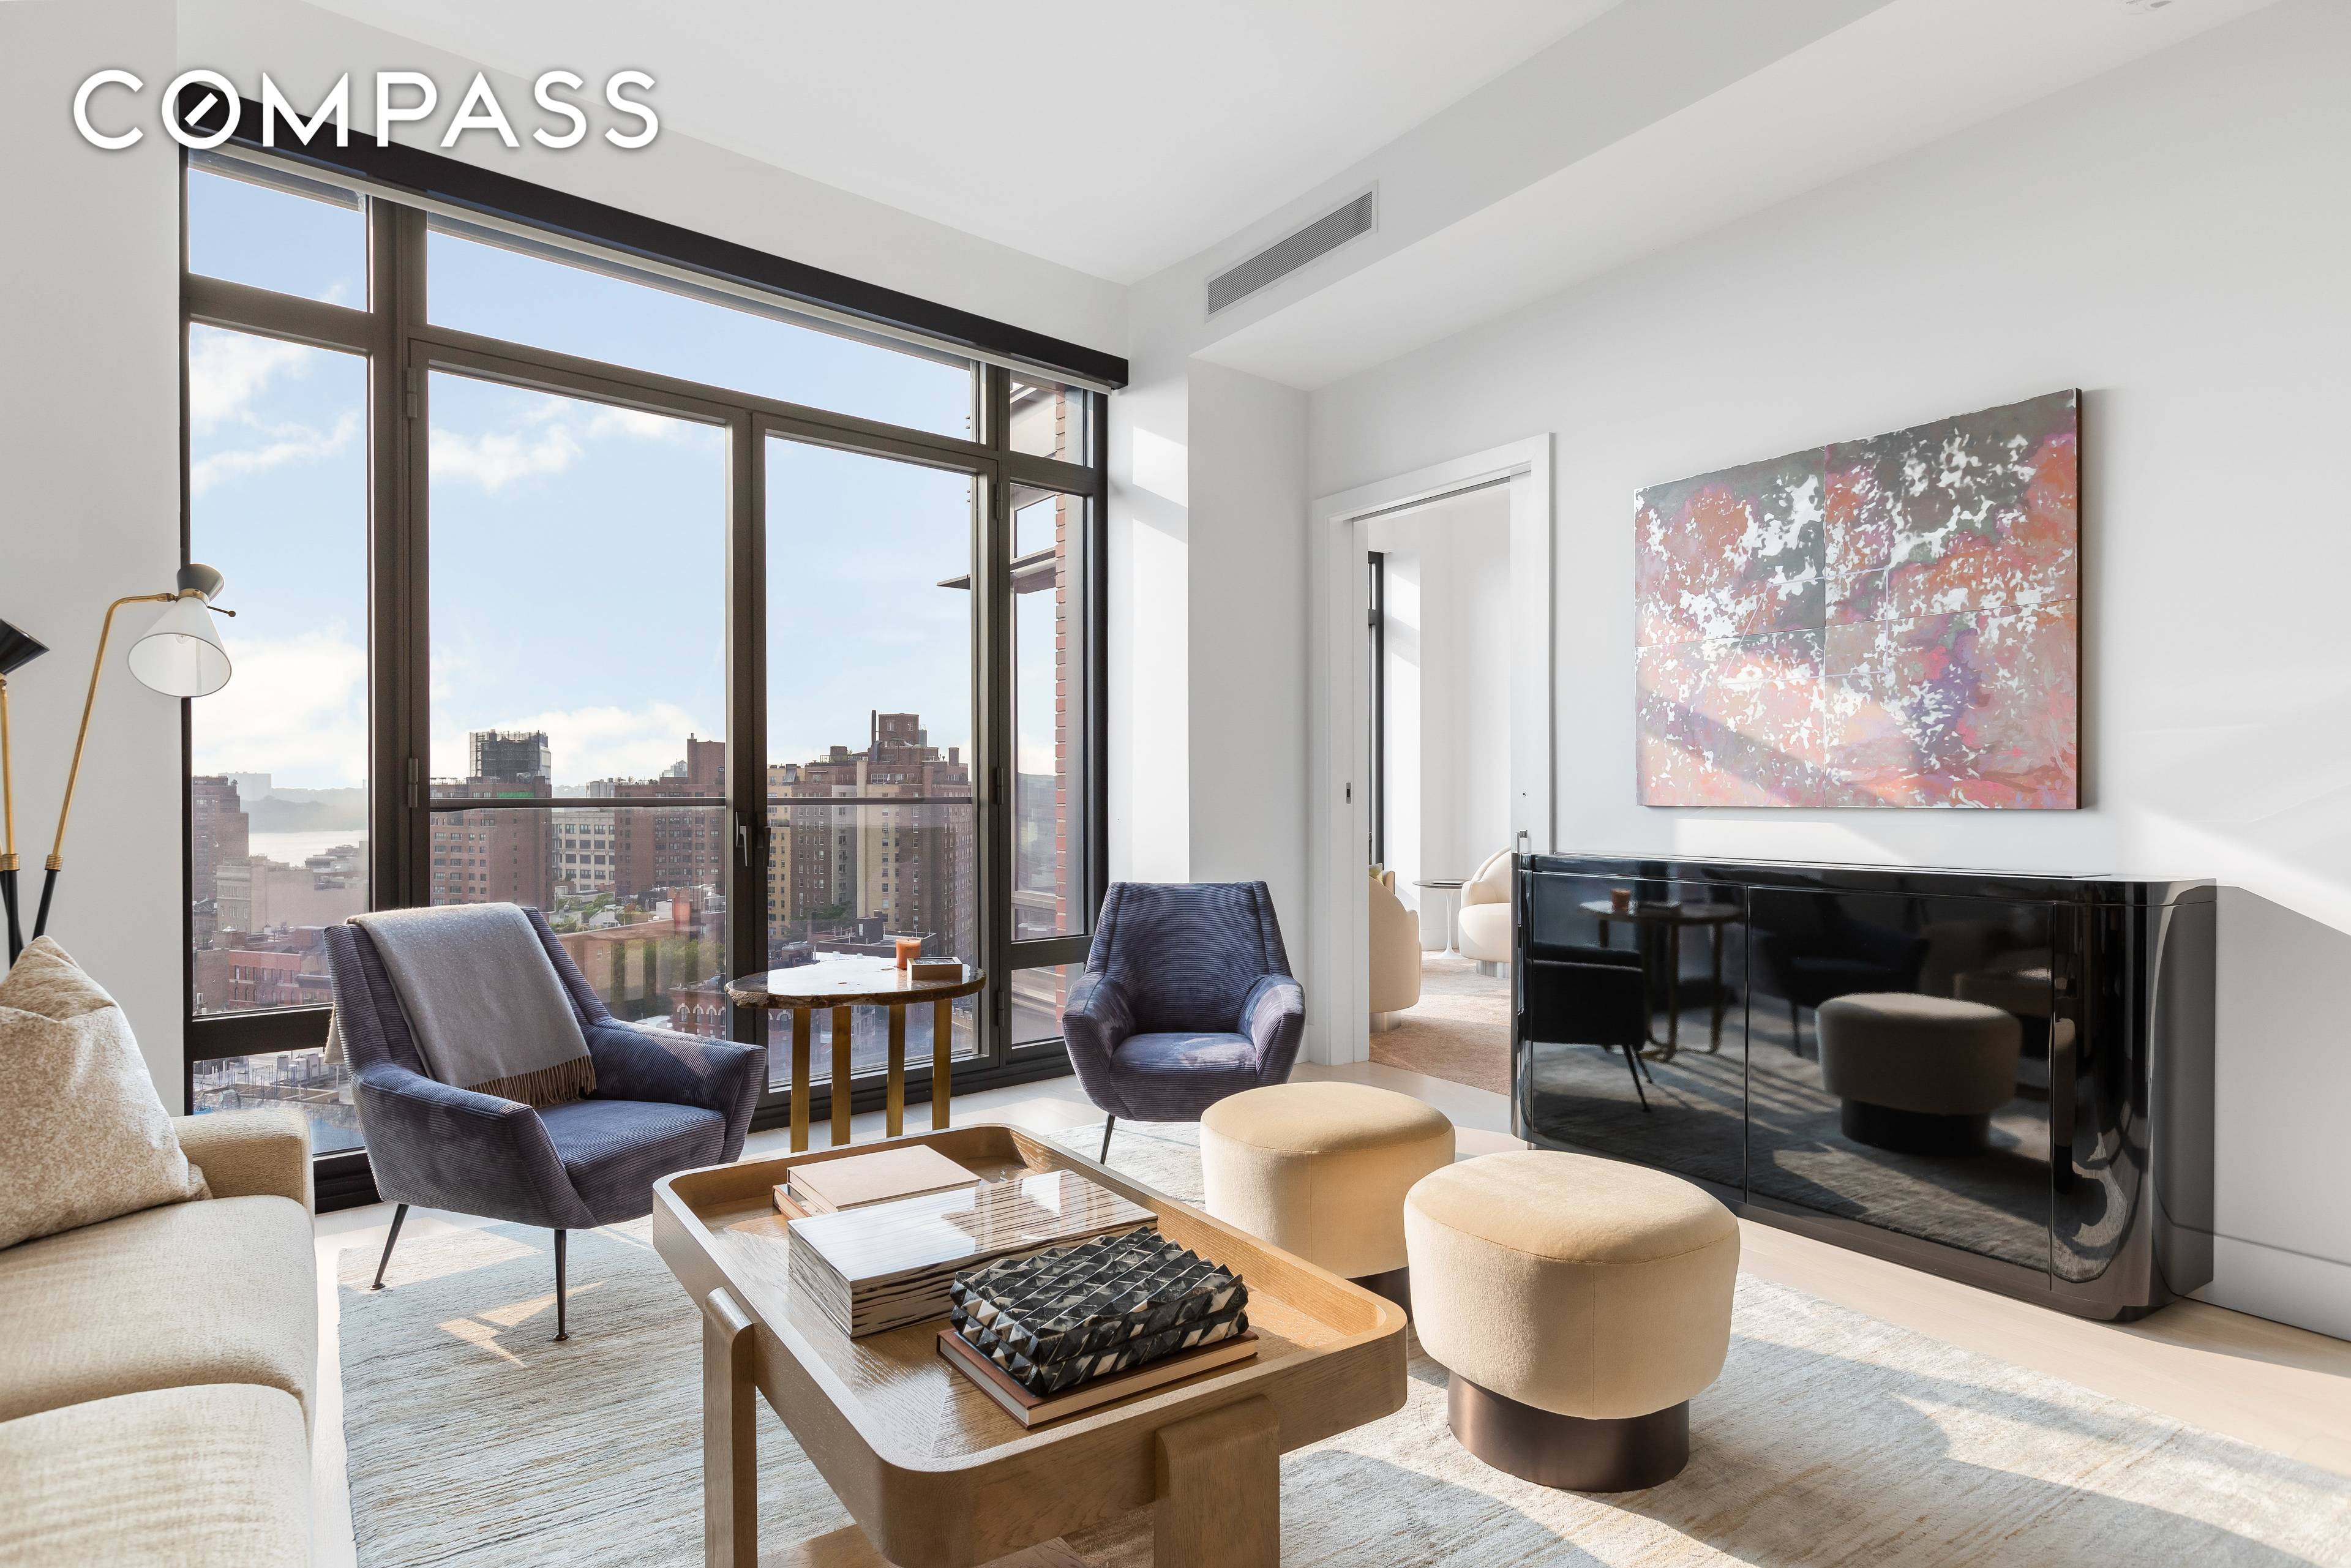 The epitome of modern style with New York attitude, this beautifully updated two bedroom, two bathroom residence offers mesmerizing sunset city views and premium designer finishes at Greenwich Village's revered ...